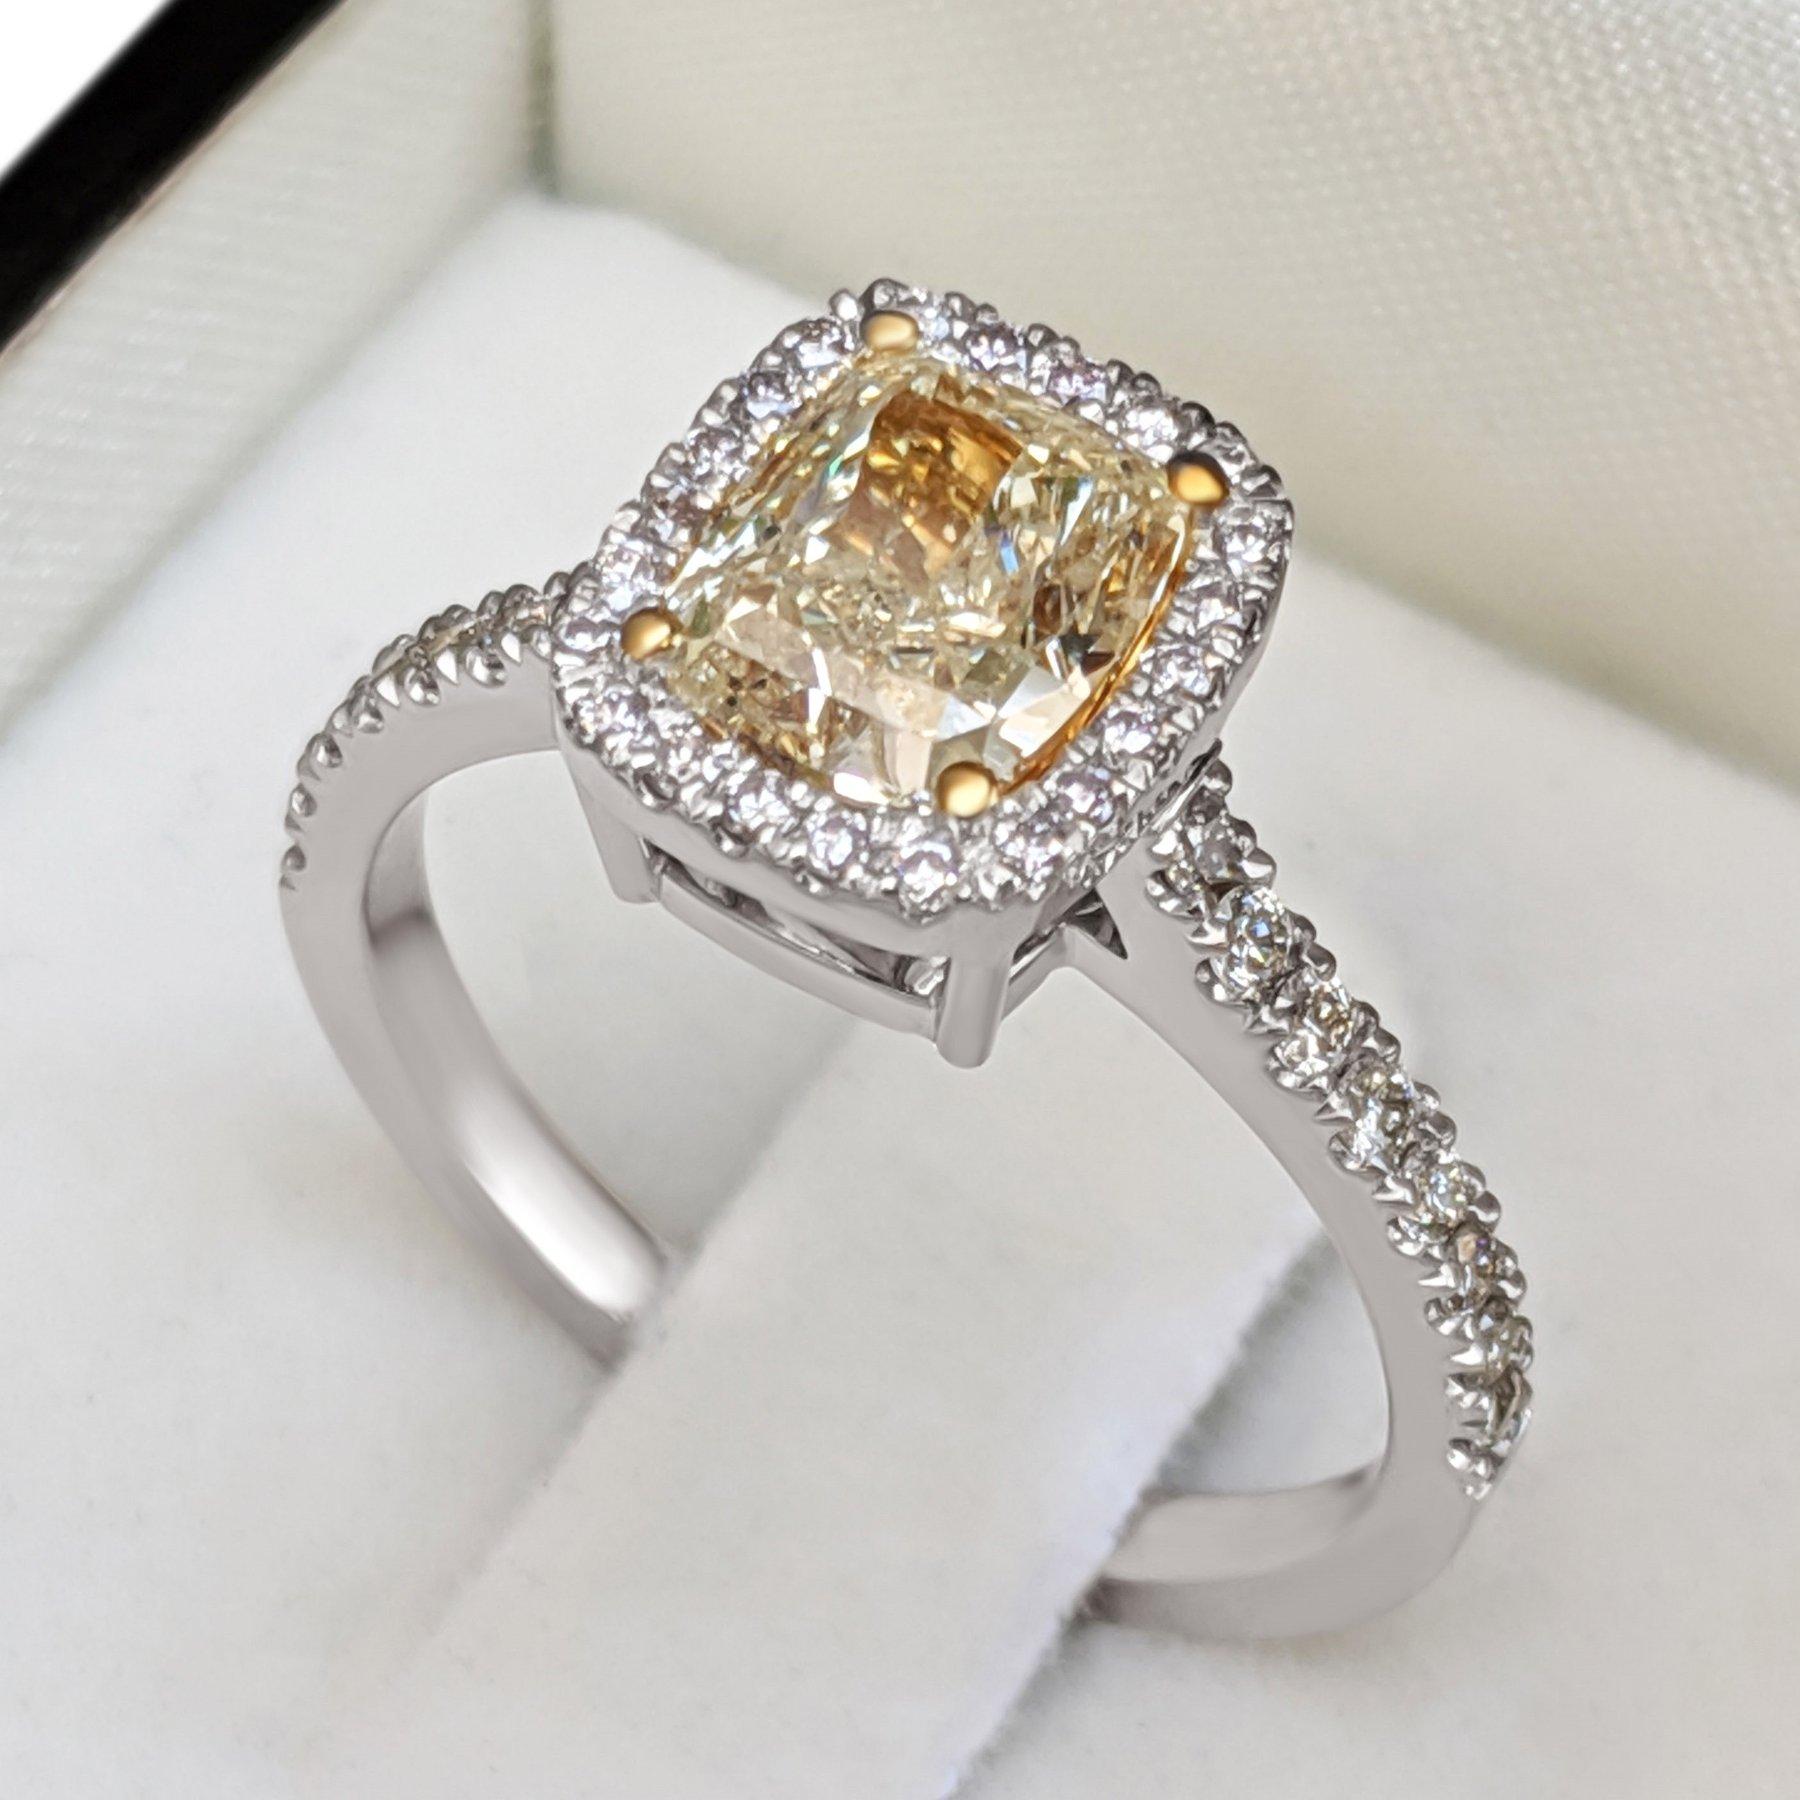 Today we are offering this amazing ring featuring a center 1.53 carat fancy yellow diamond and 0.46 cttw diamonds halo ring.
Ring can be resized free of charge prior to shipping out.
Ring Size: ?? EU

Center Stone Diamonds:
Weight: 1.53 ct
Color